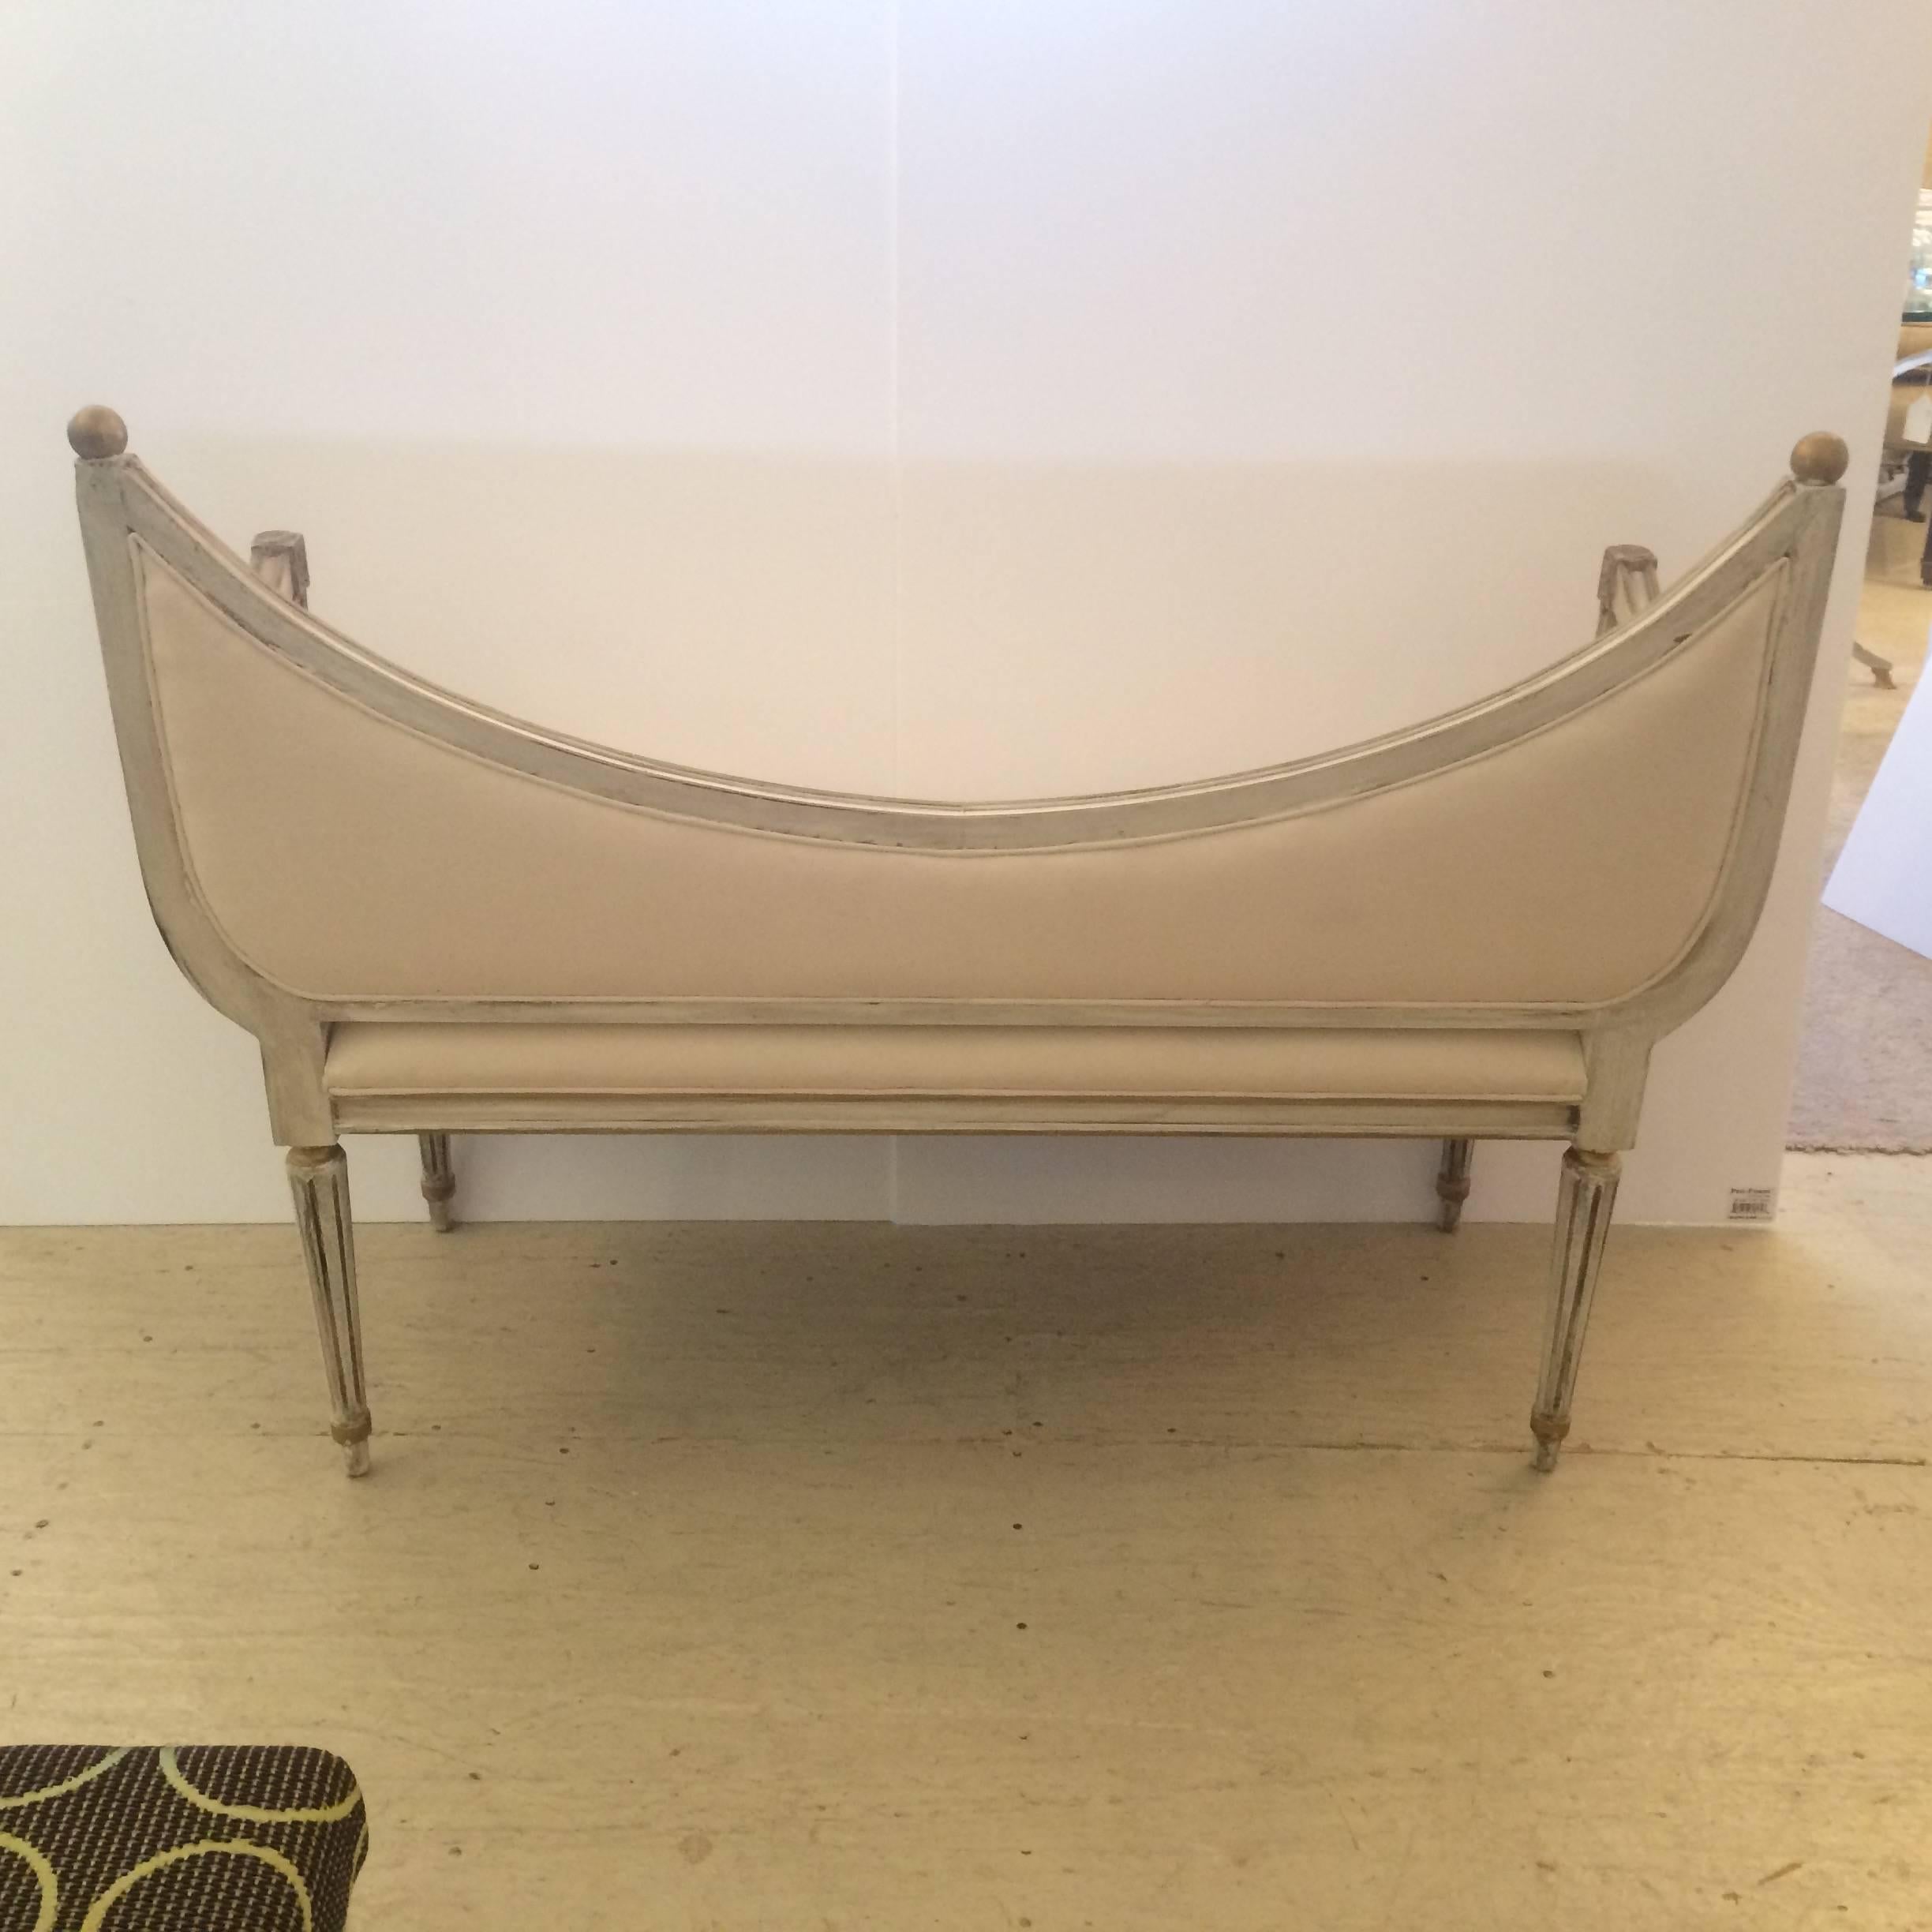 Dreamy scoop back settee bench with original grey Gustavian grey wood, reeded legs and wonderfully shaped arms, gilt ball finials and detailing, newly upholstered in white duck.
Measures:
Seat height 17